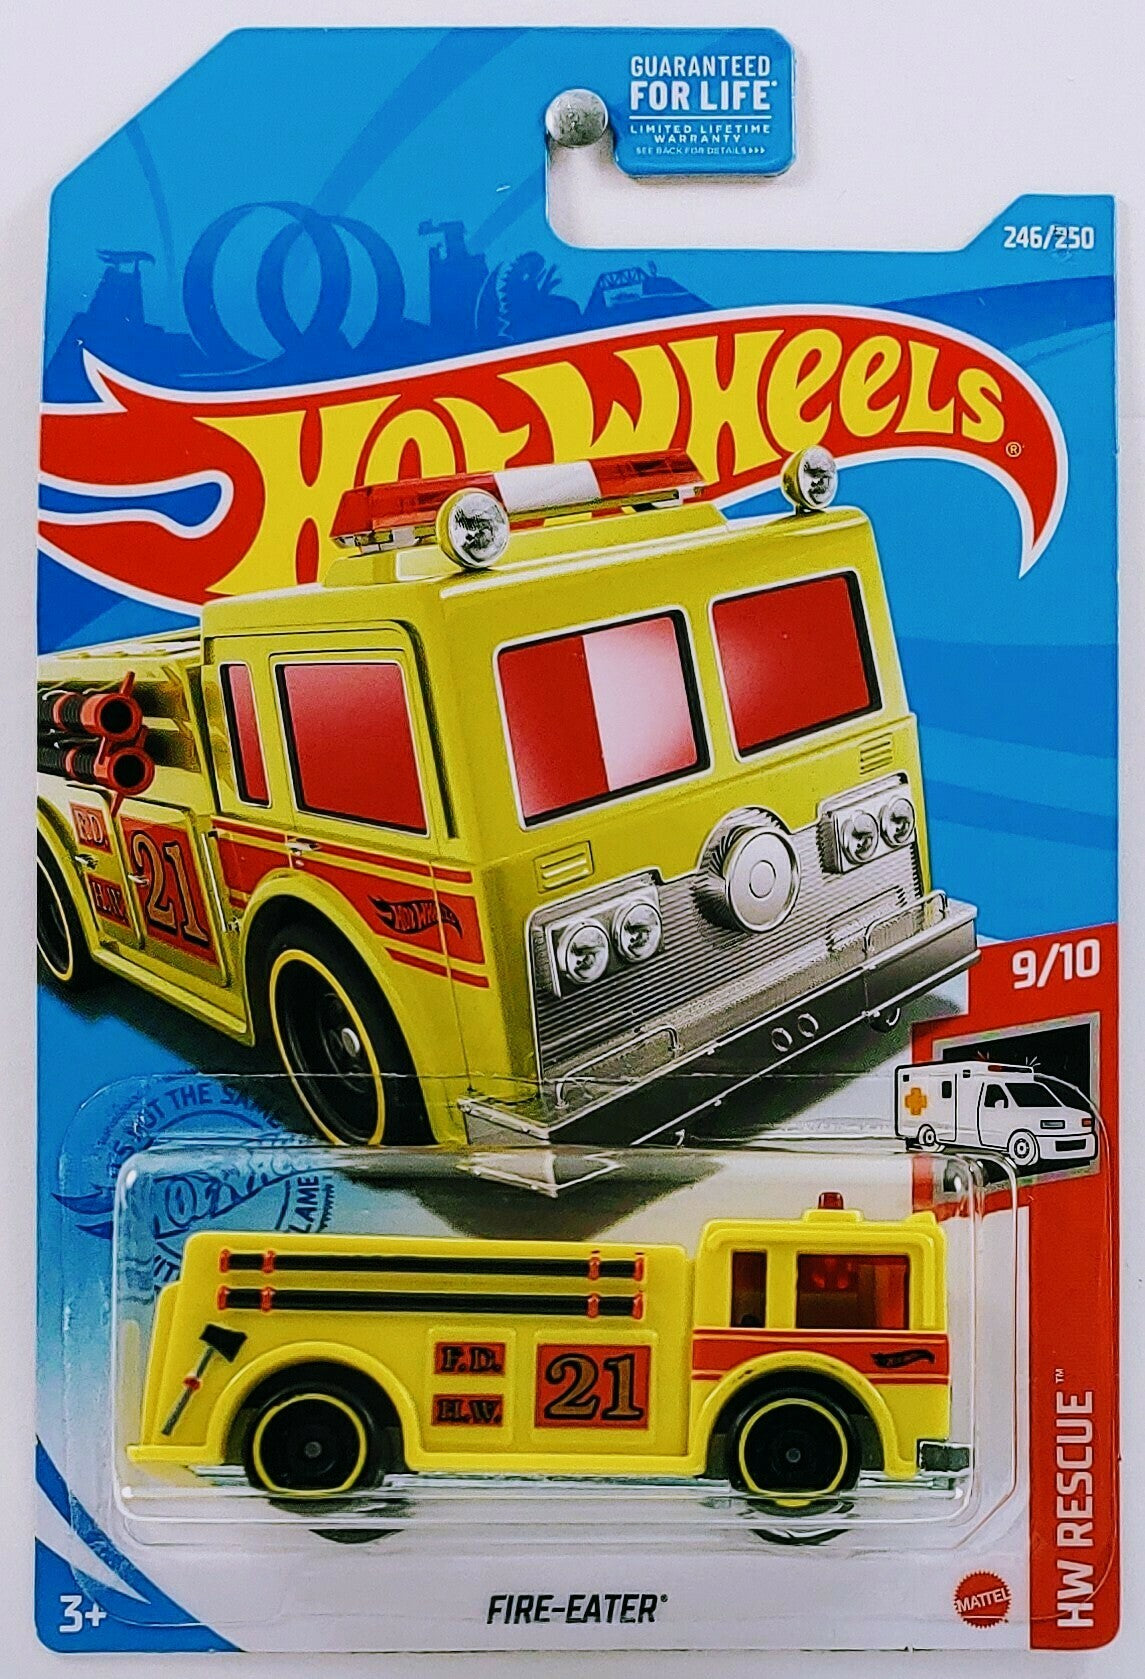 Hot Wheels 2021 - Collector # 246/250 - HW Rescue 09/10 - Fire-Eater (Pumper) - Yellow - USA